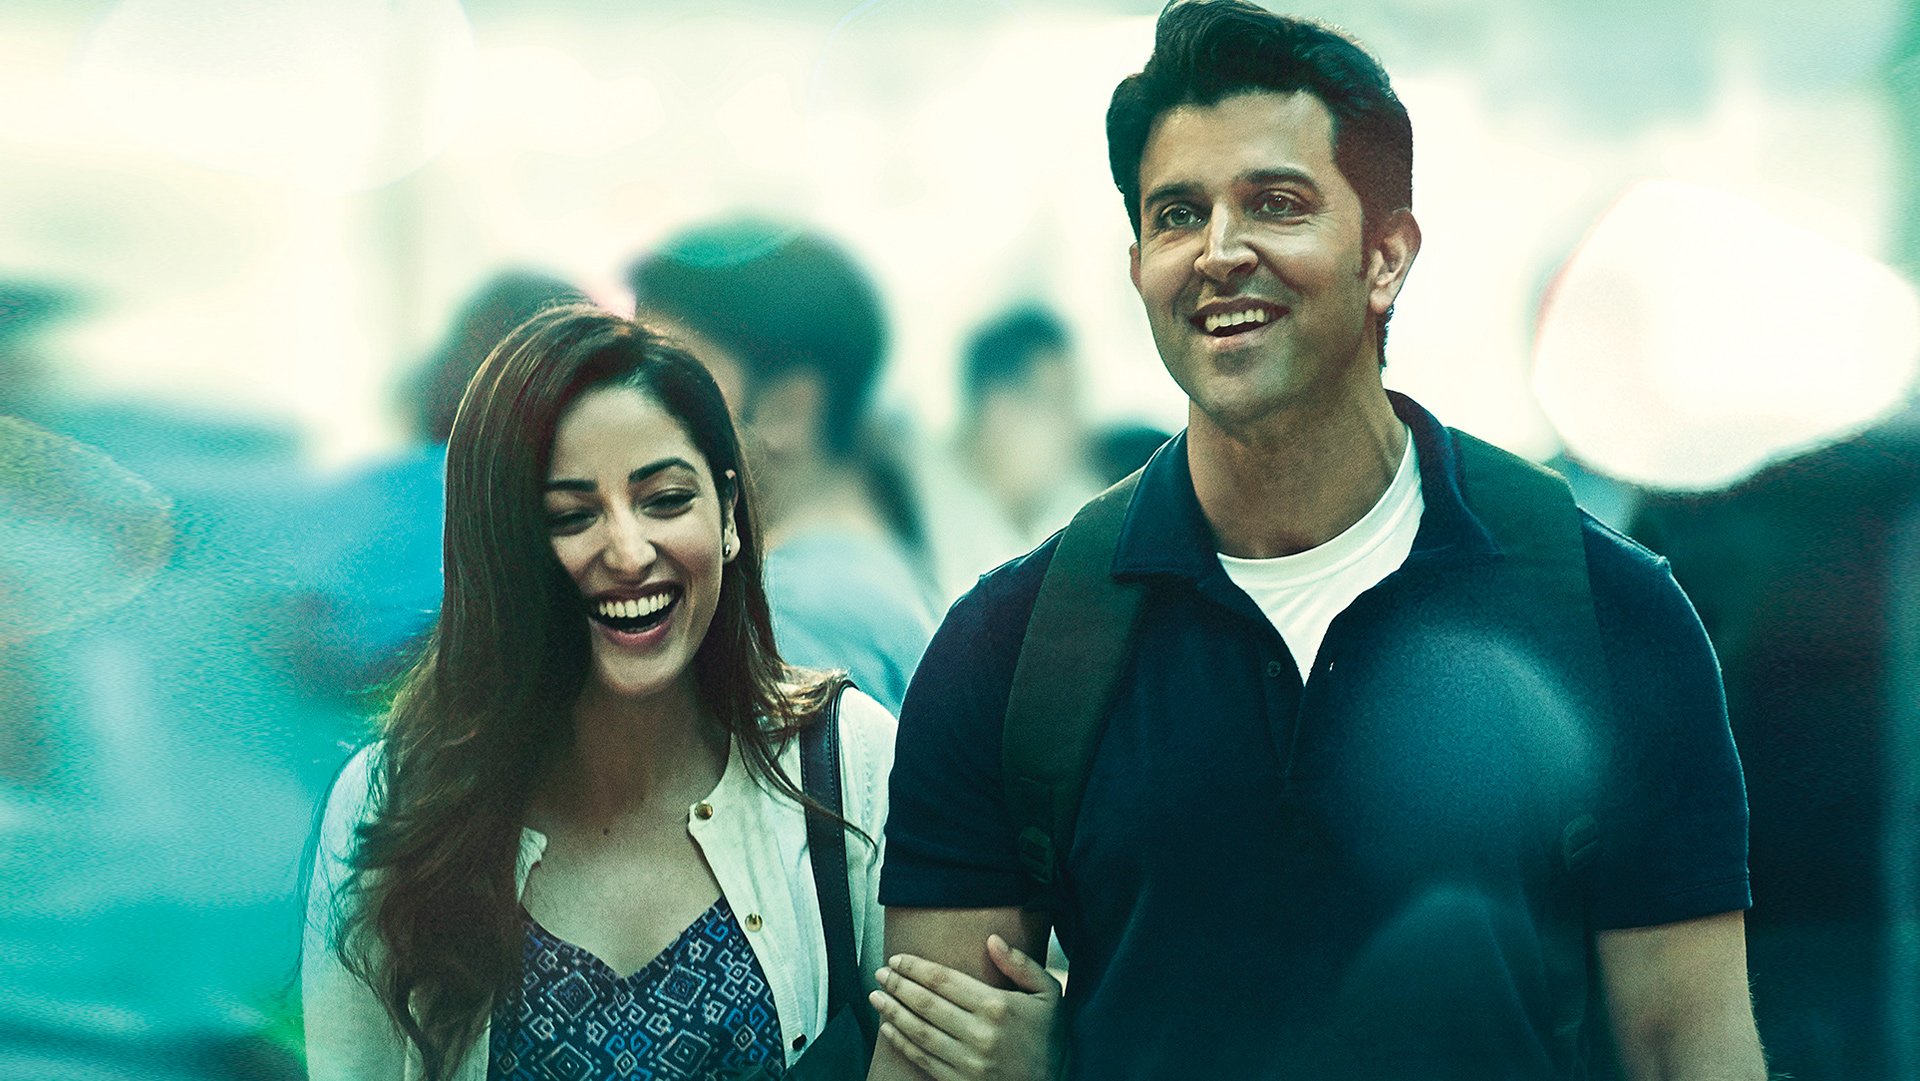 Hrithik-Roshan-talks-about-playing-a-visually-impaired-character-in-Kaabil.jpg